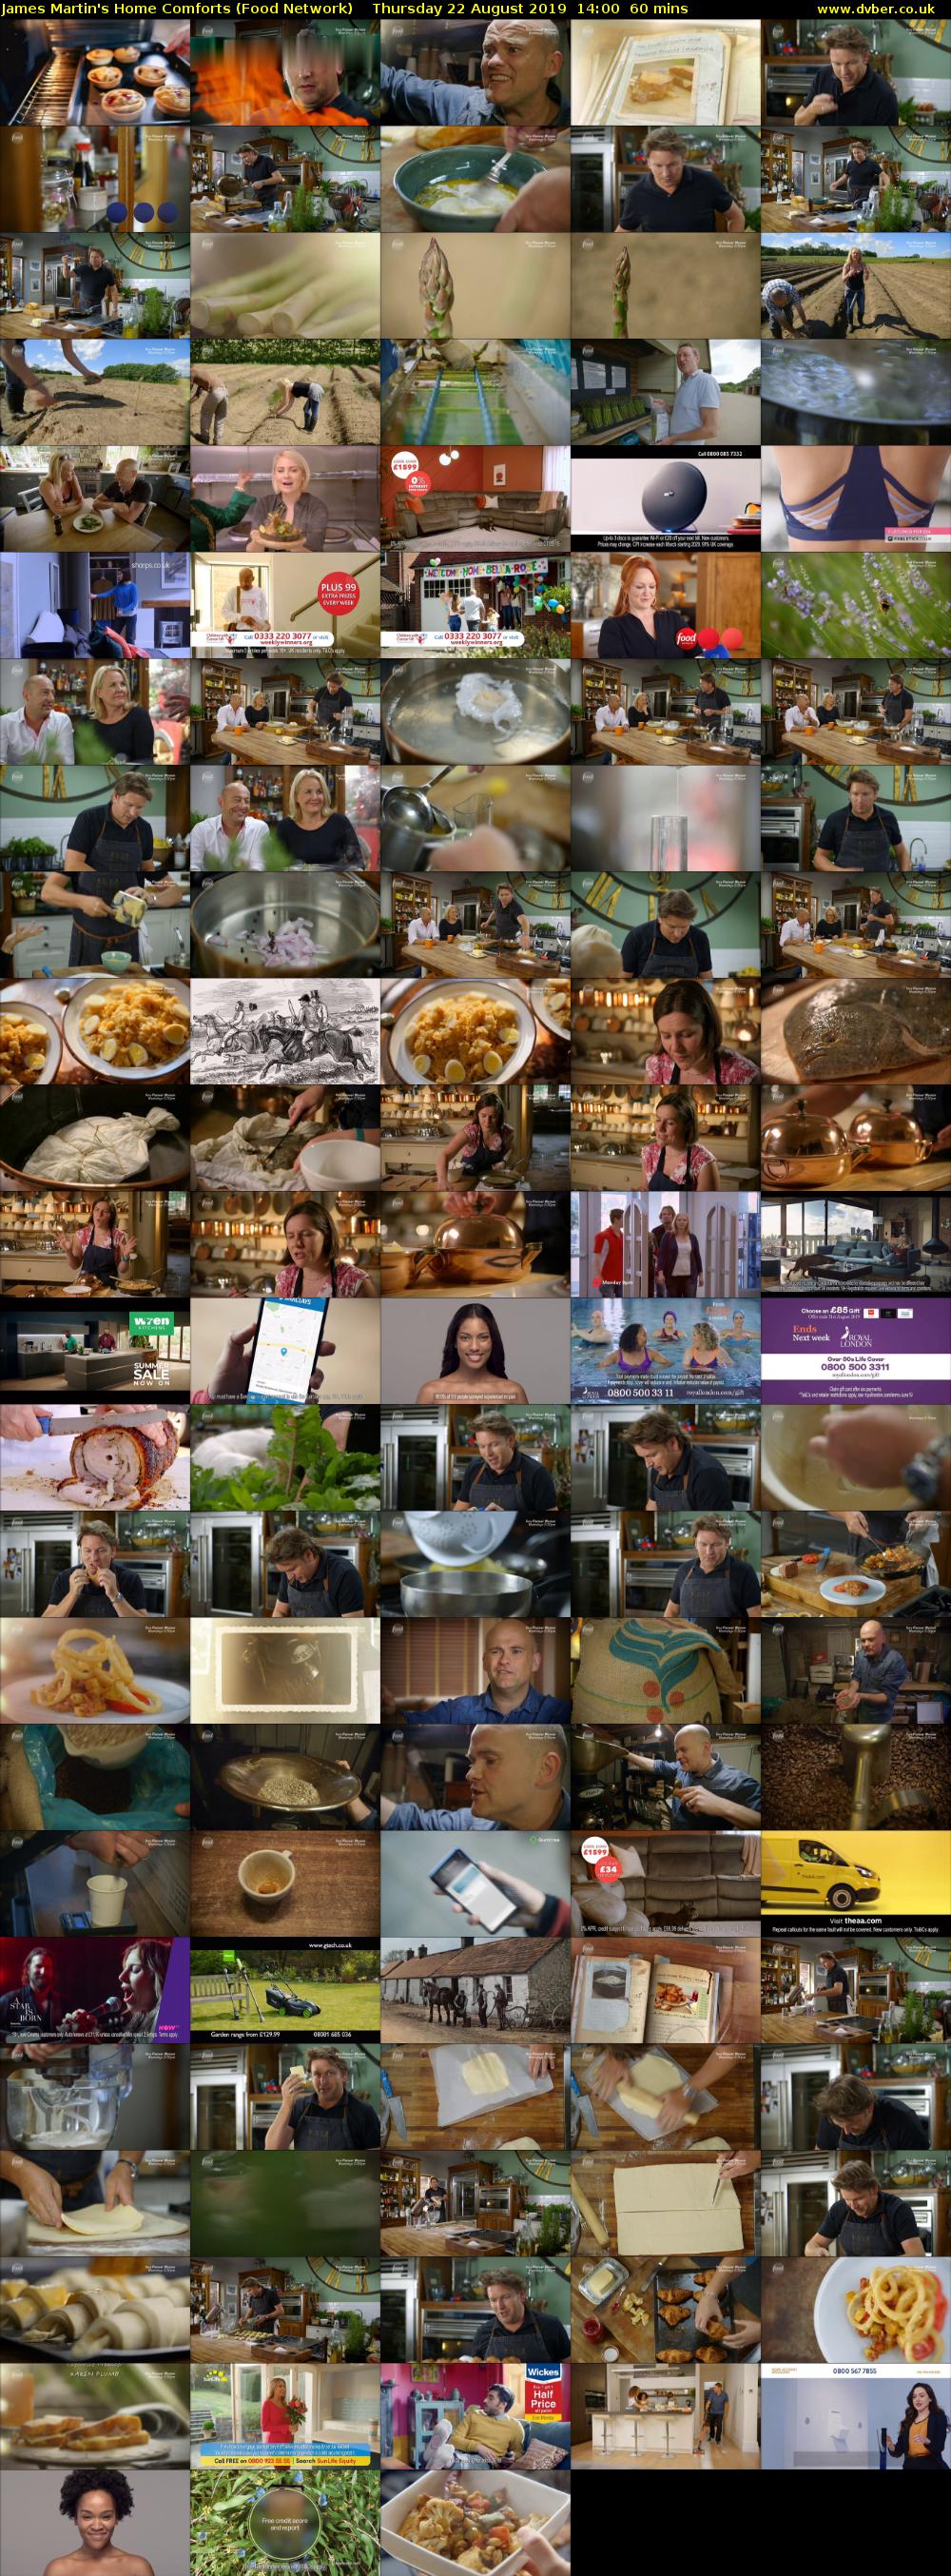 James Martin's Home Comforts (Food Network) Thursday 22 August 2019 14:00 - 15:00